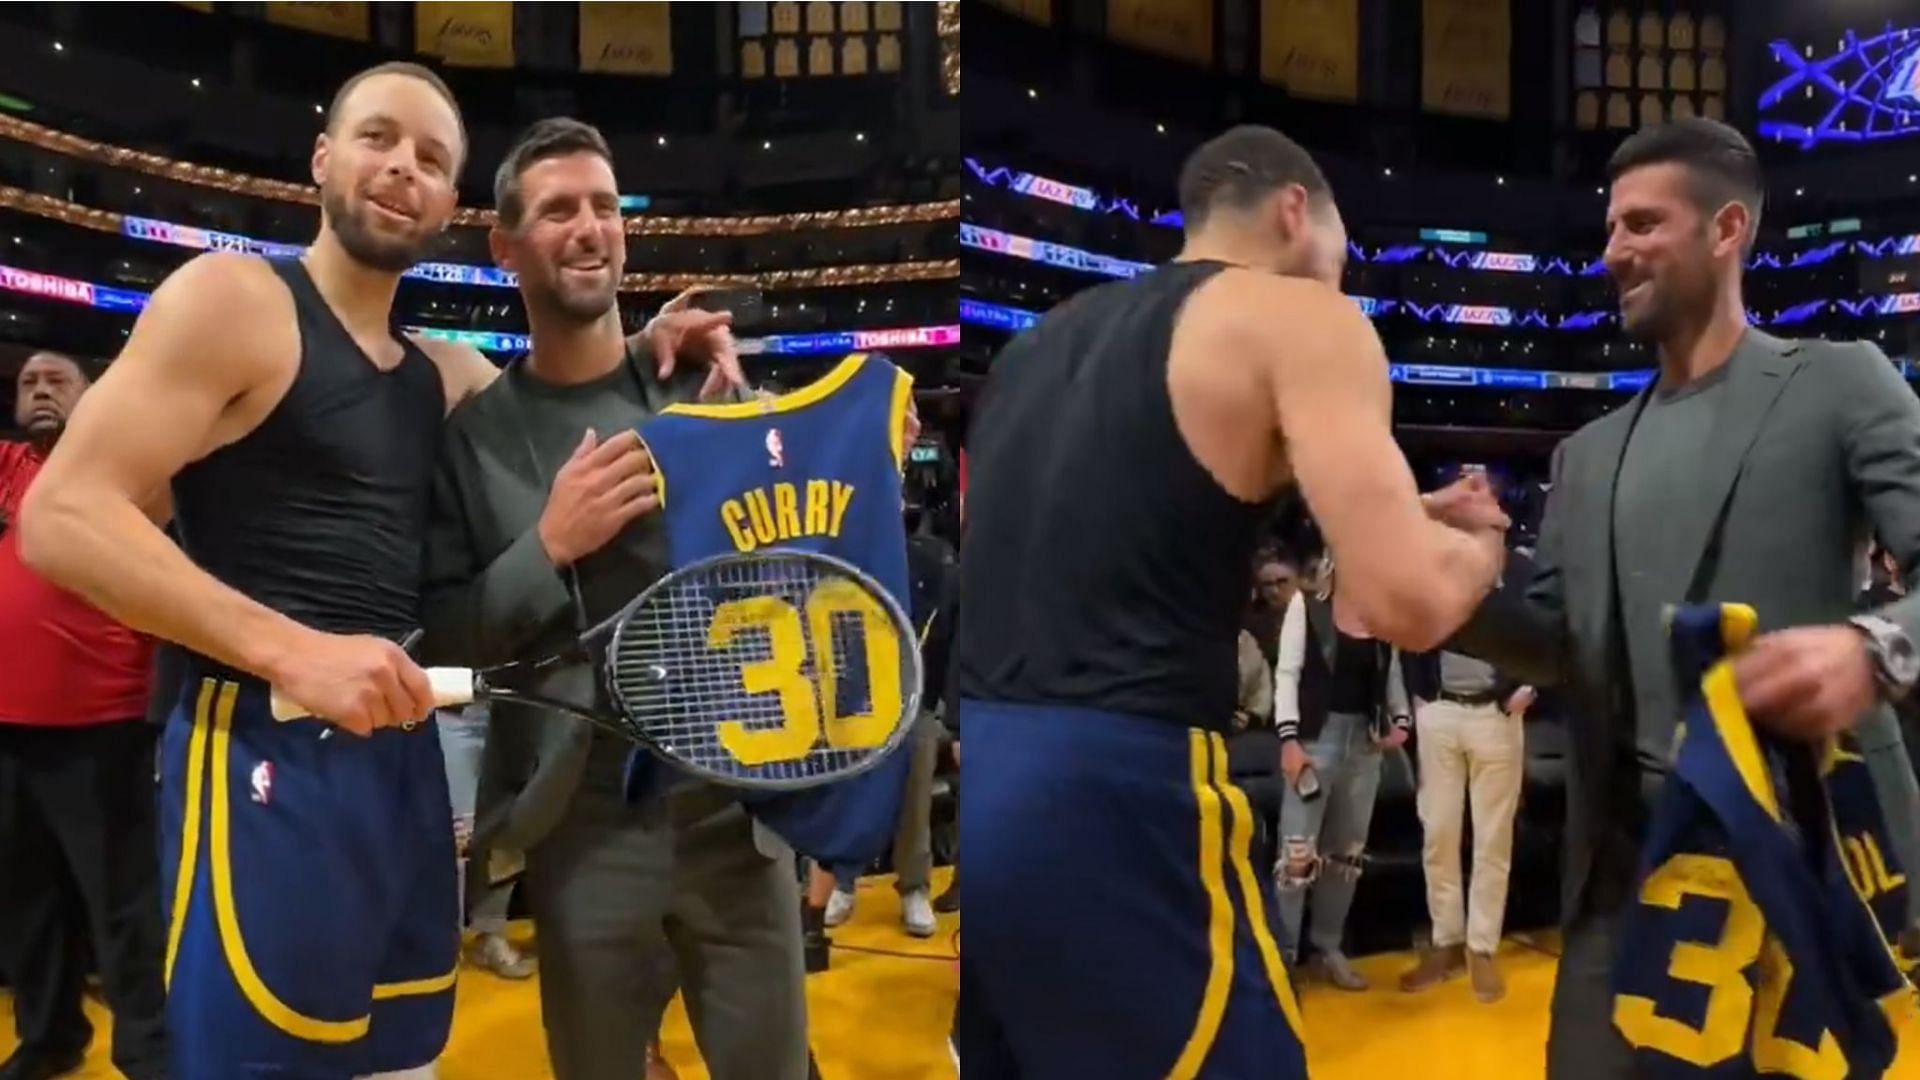 Steph Curry and Novak Djokovic share a moment after the Warriors-Lakers game